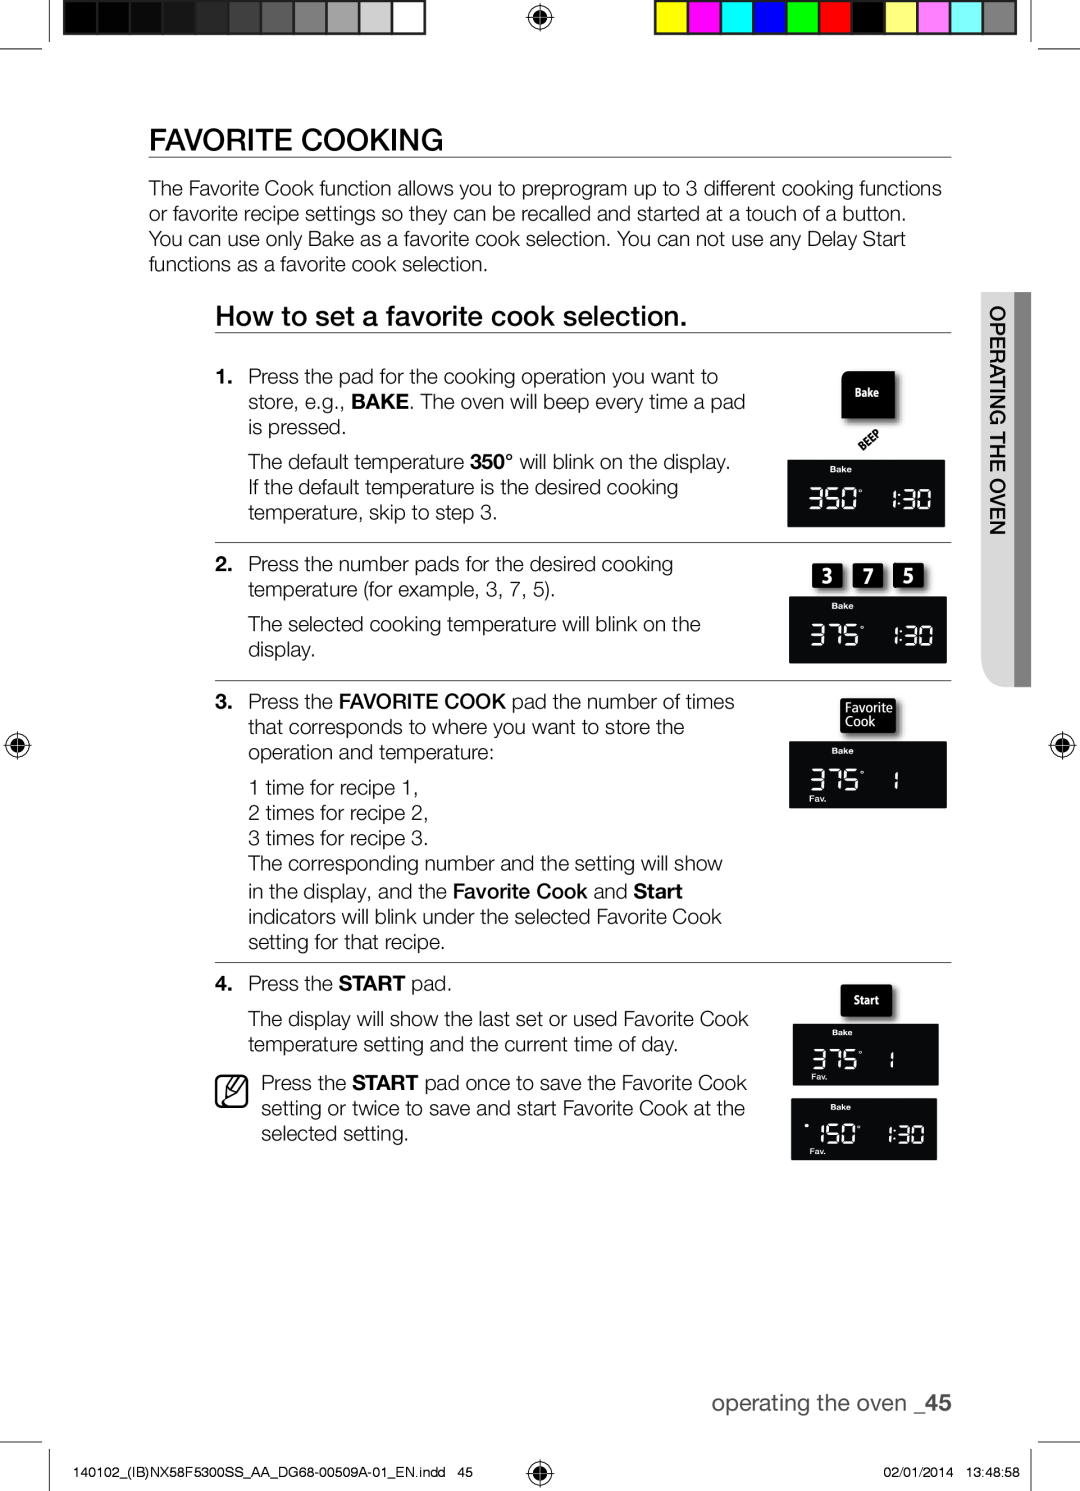 Samsung NX58F5500SW user manual Favorite Cooking, How to set a favorite cook selection, operating the oven 